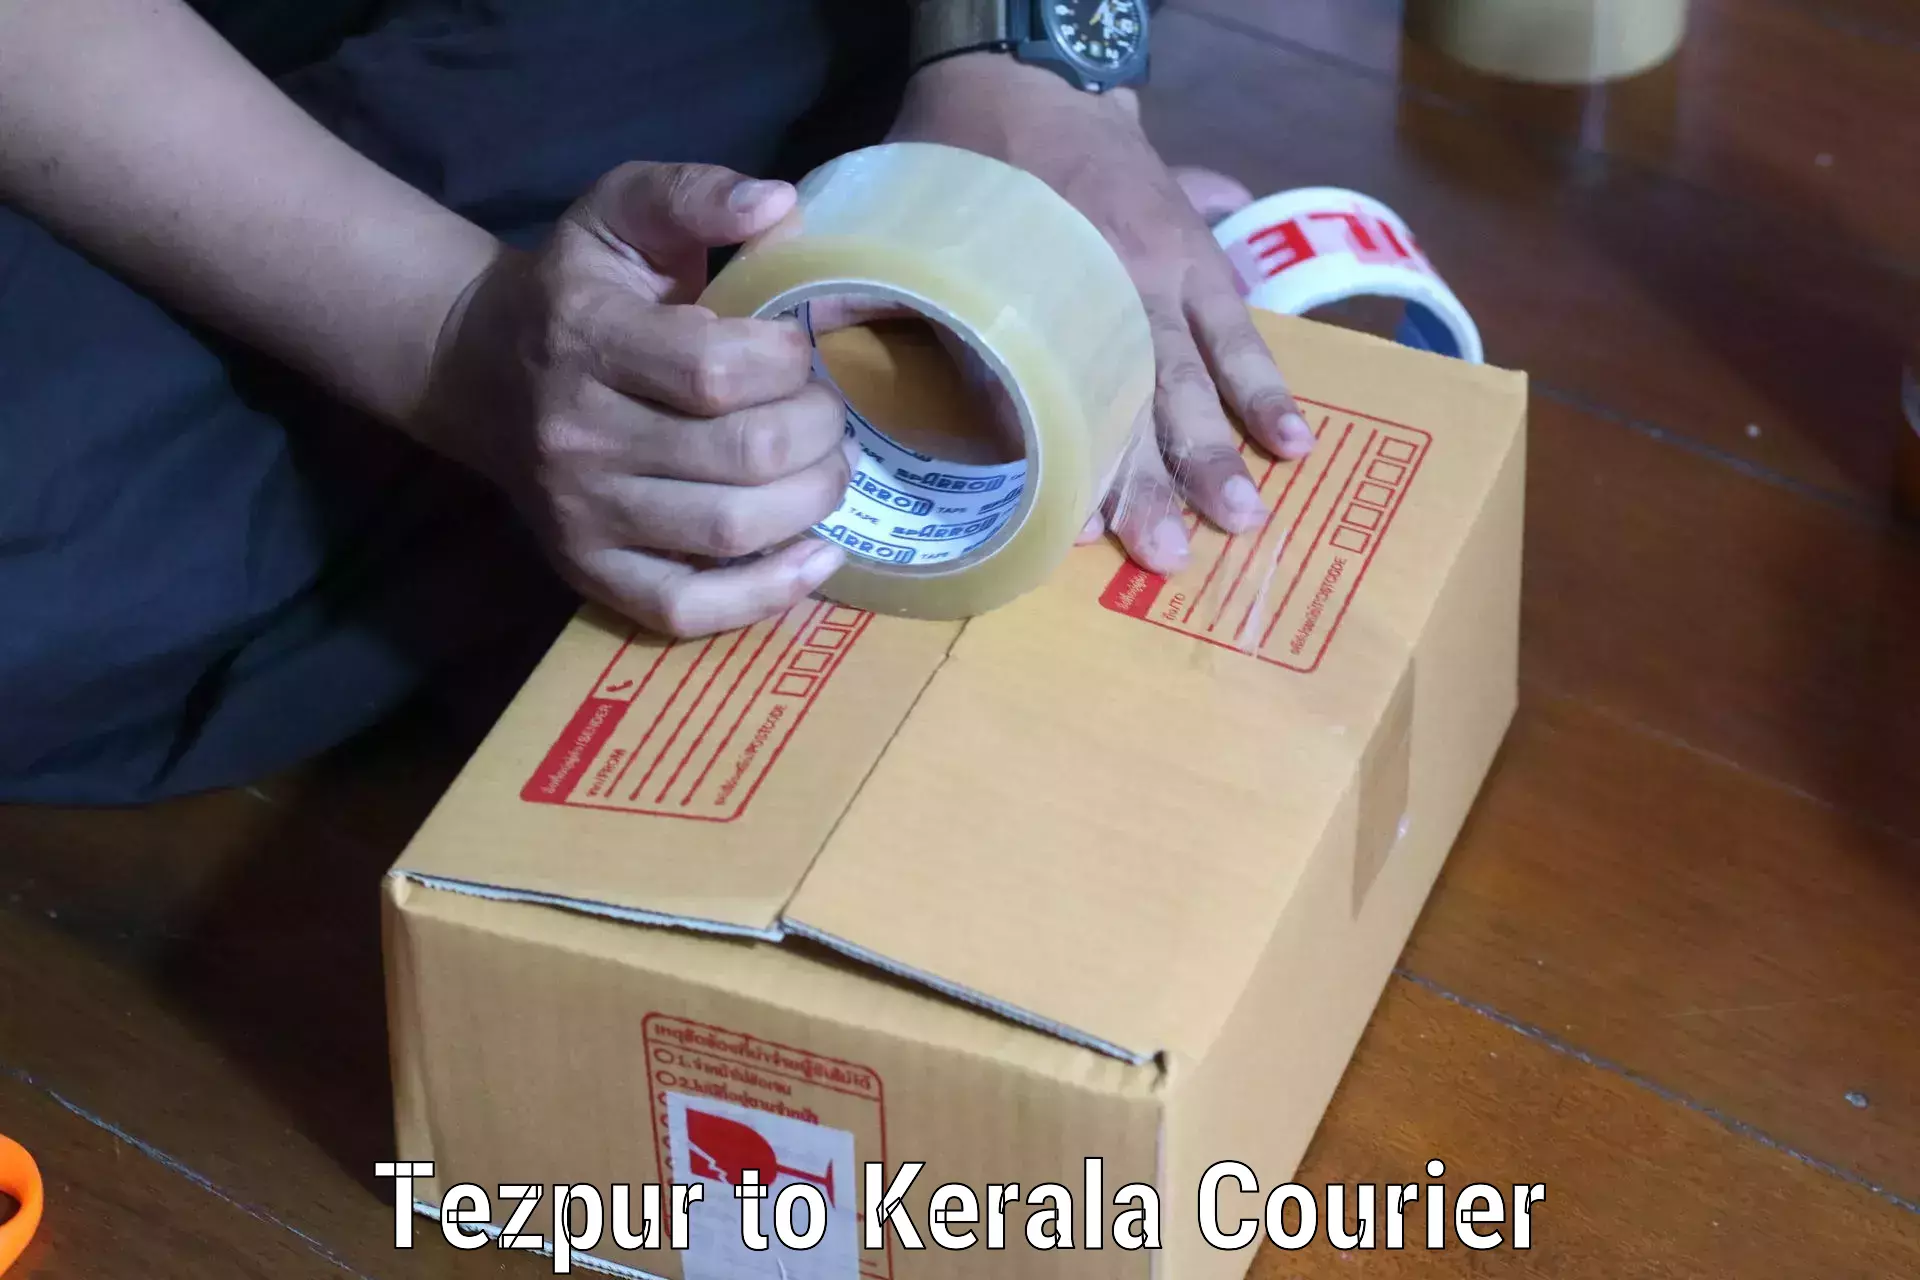 Express delivery capabilities Tezpur to Munnar